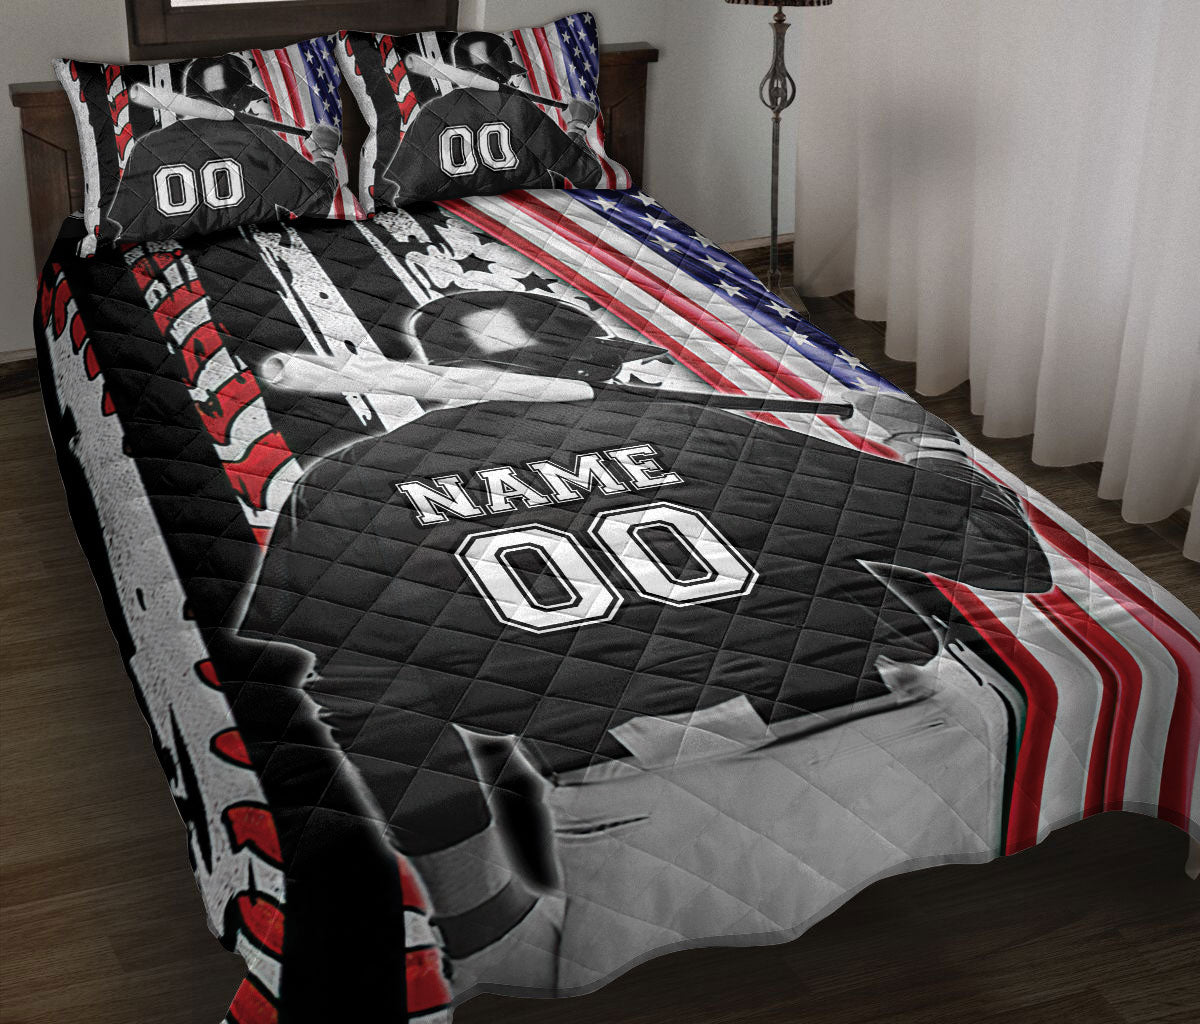 Ohaprints-Quilt-Bed-Set-Pillowcase-Softball-Baseball-Lover-Player-America-Us-Flag-Custom-Personalized-Name-Number-Blanket-Bedspread-Bedding-2358-Throw (55'' x 60'')